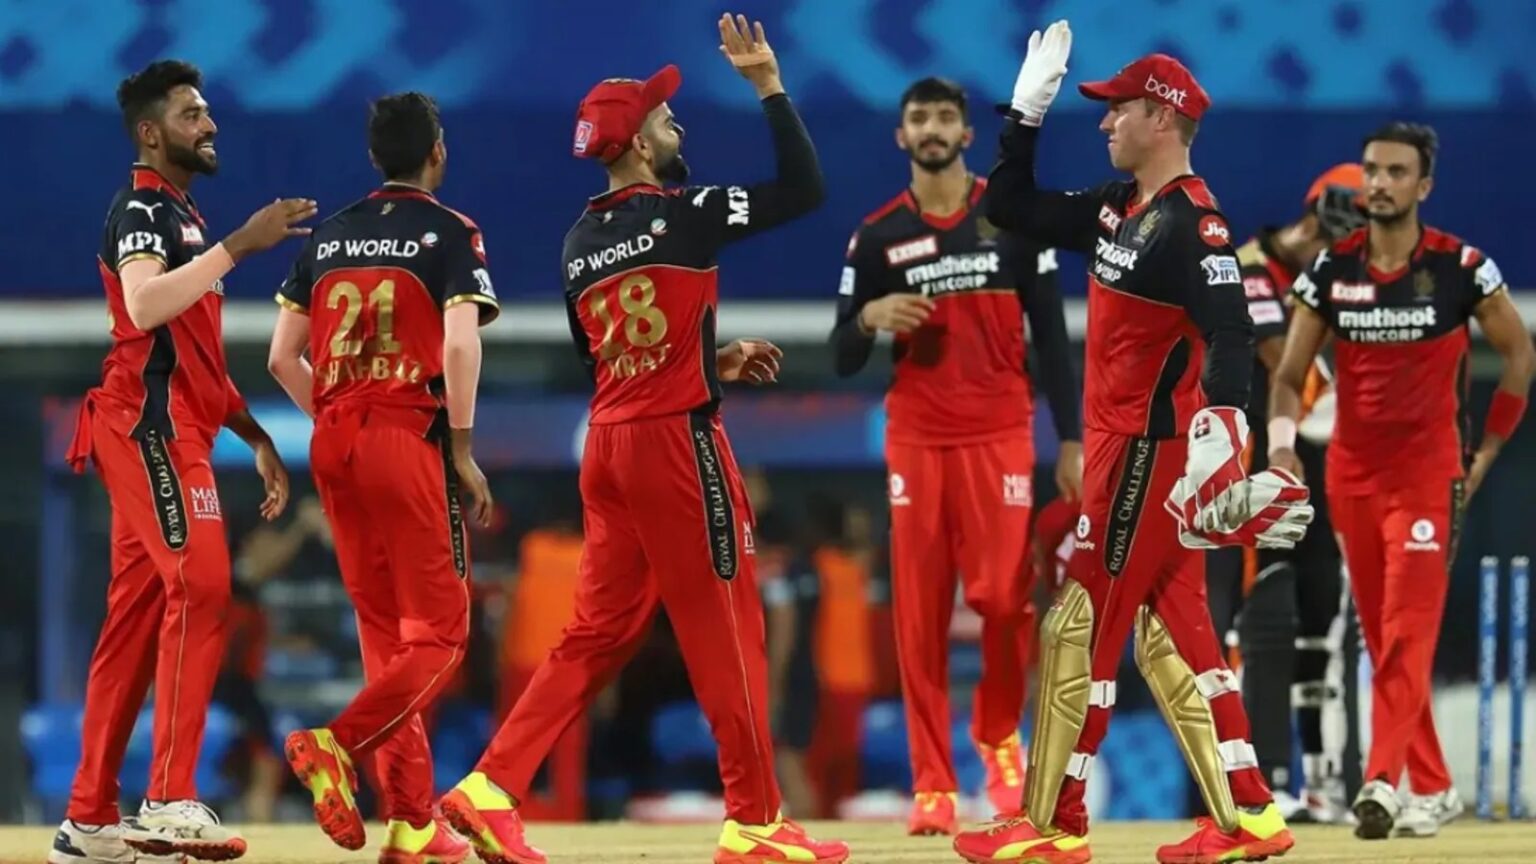 IPL 2021: Royal Challengers Bangalore (RCB) Updated Squad, Schedule, Time, And Venue